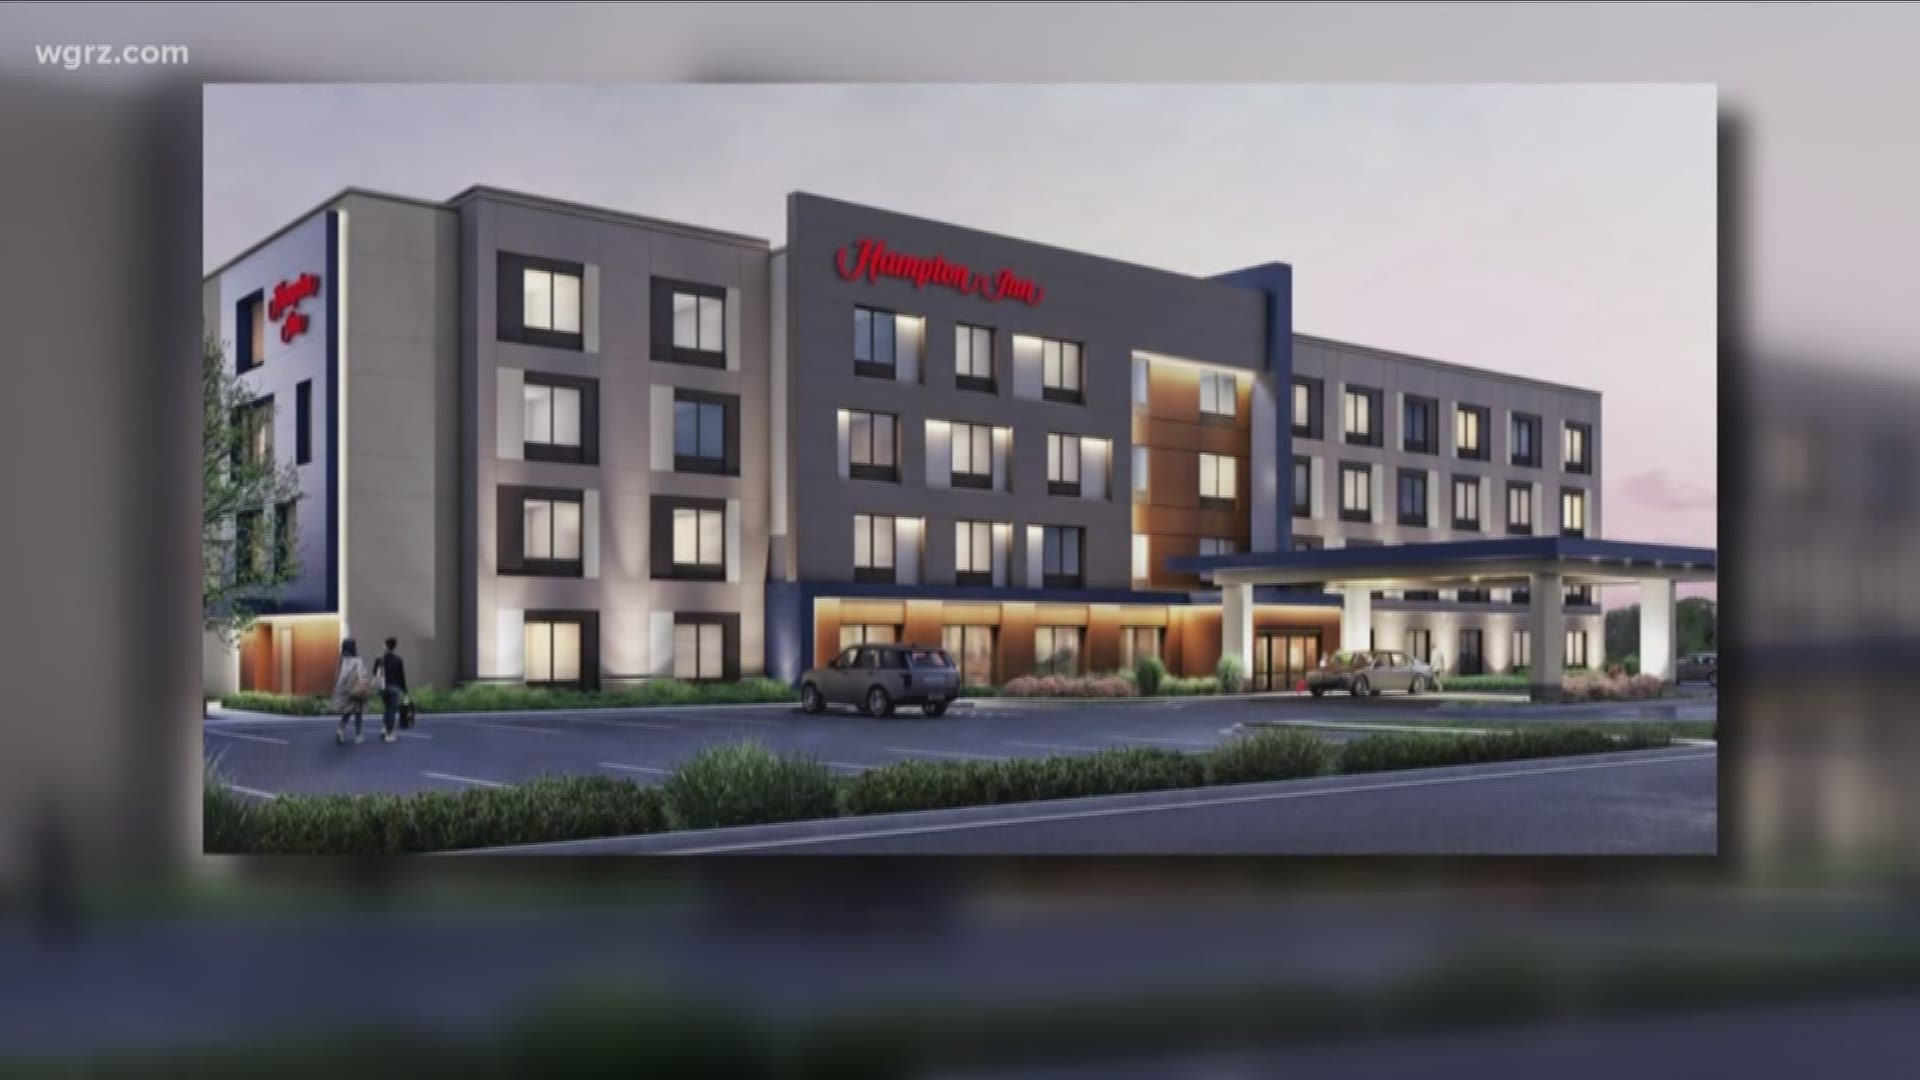 Hearing About Tax Breaks  For Amherst Hotel